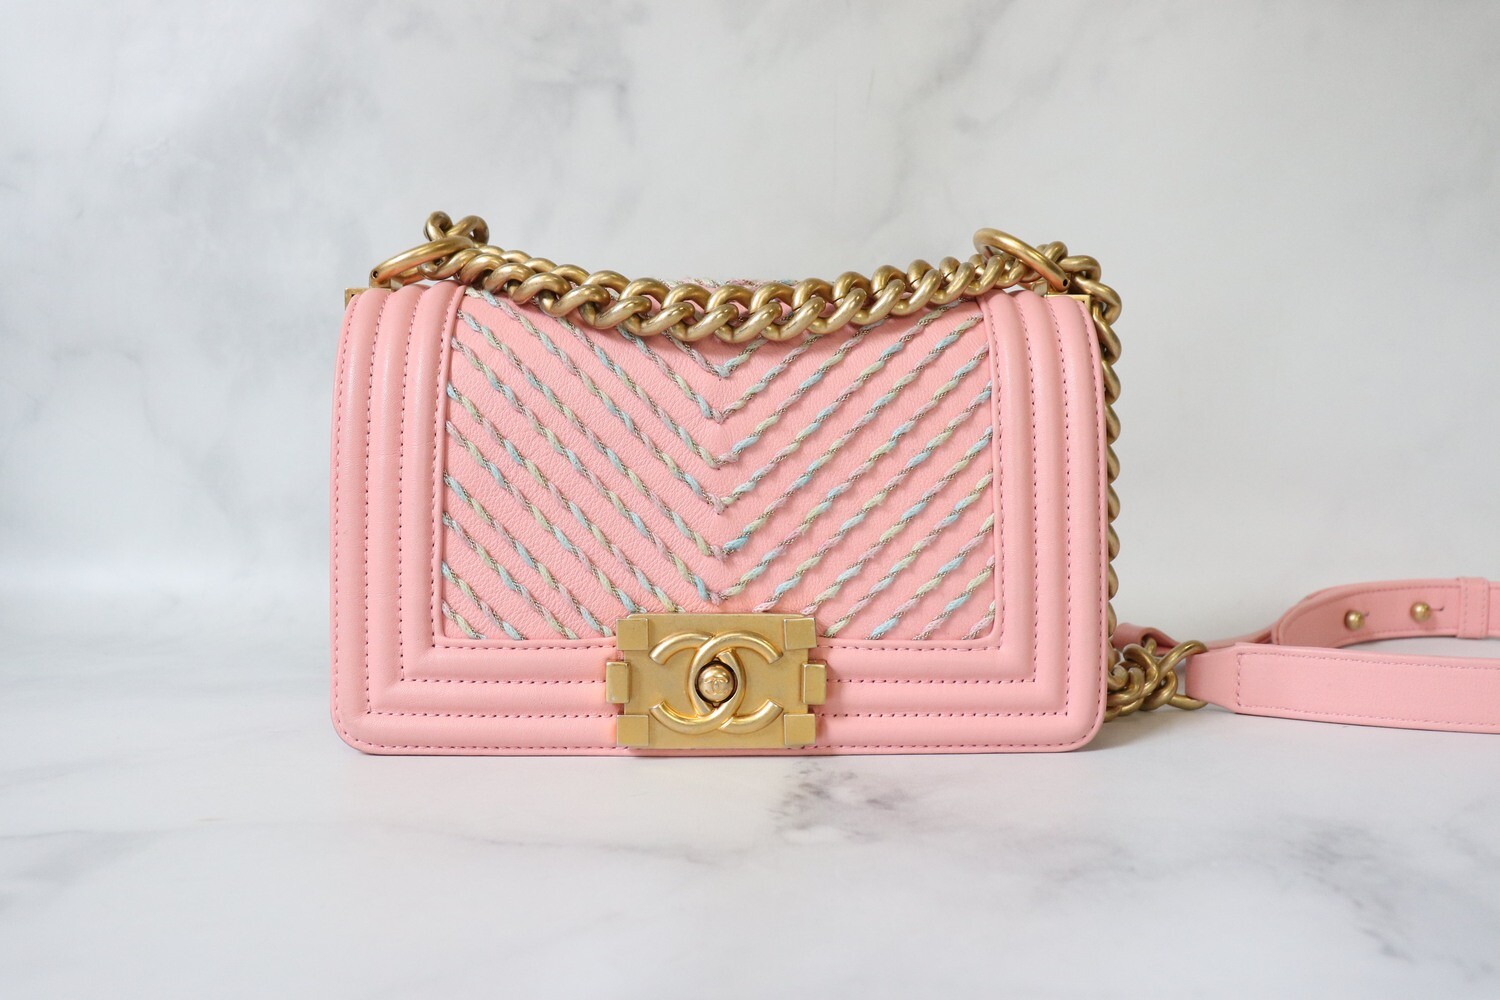 Chanel Pink Chevron Quilted Lambskin North-South Le Boy Shoulder Bag